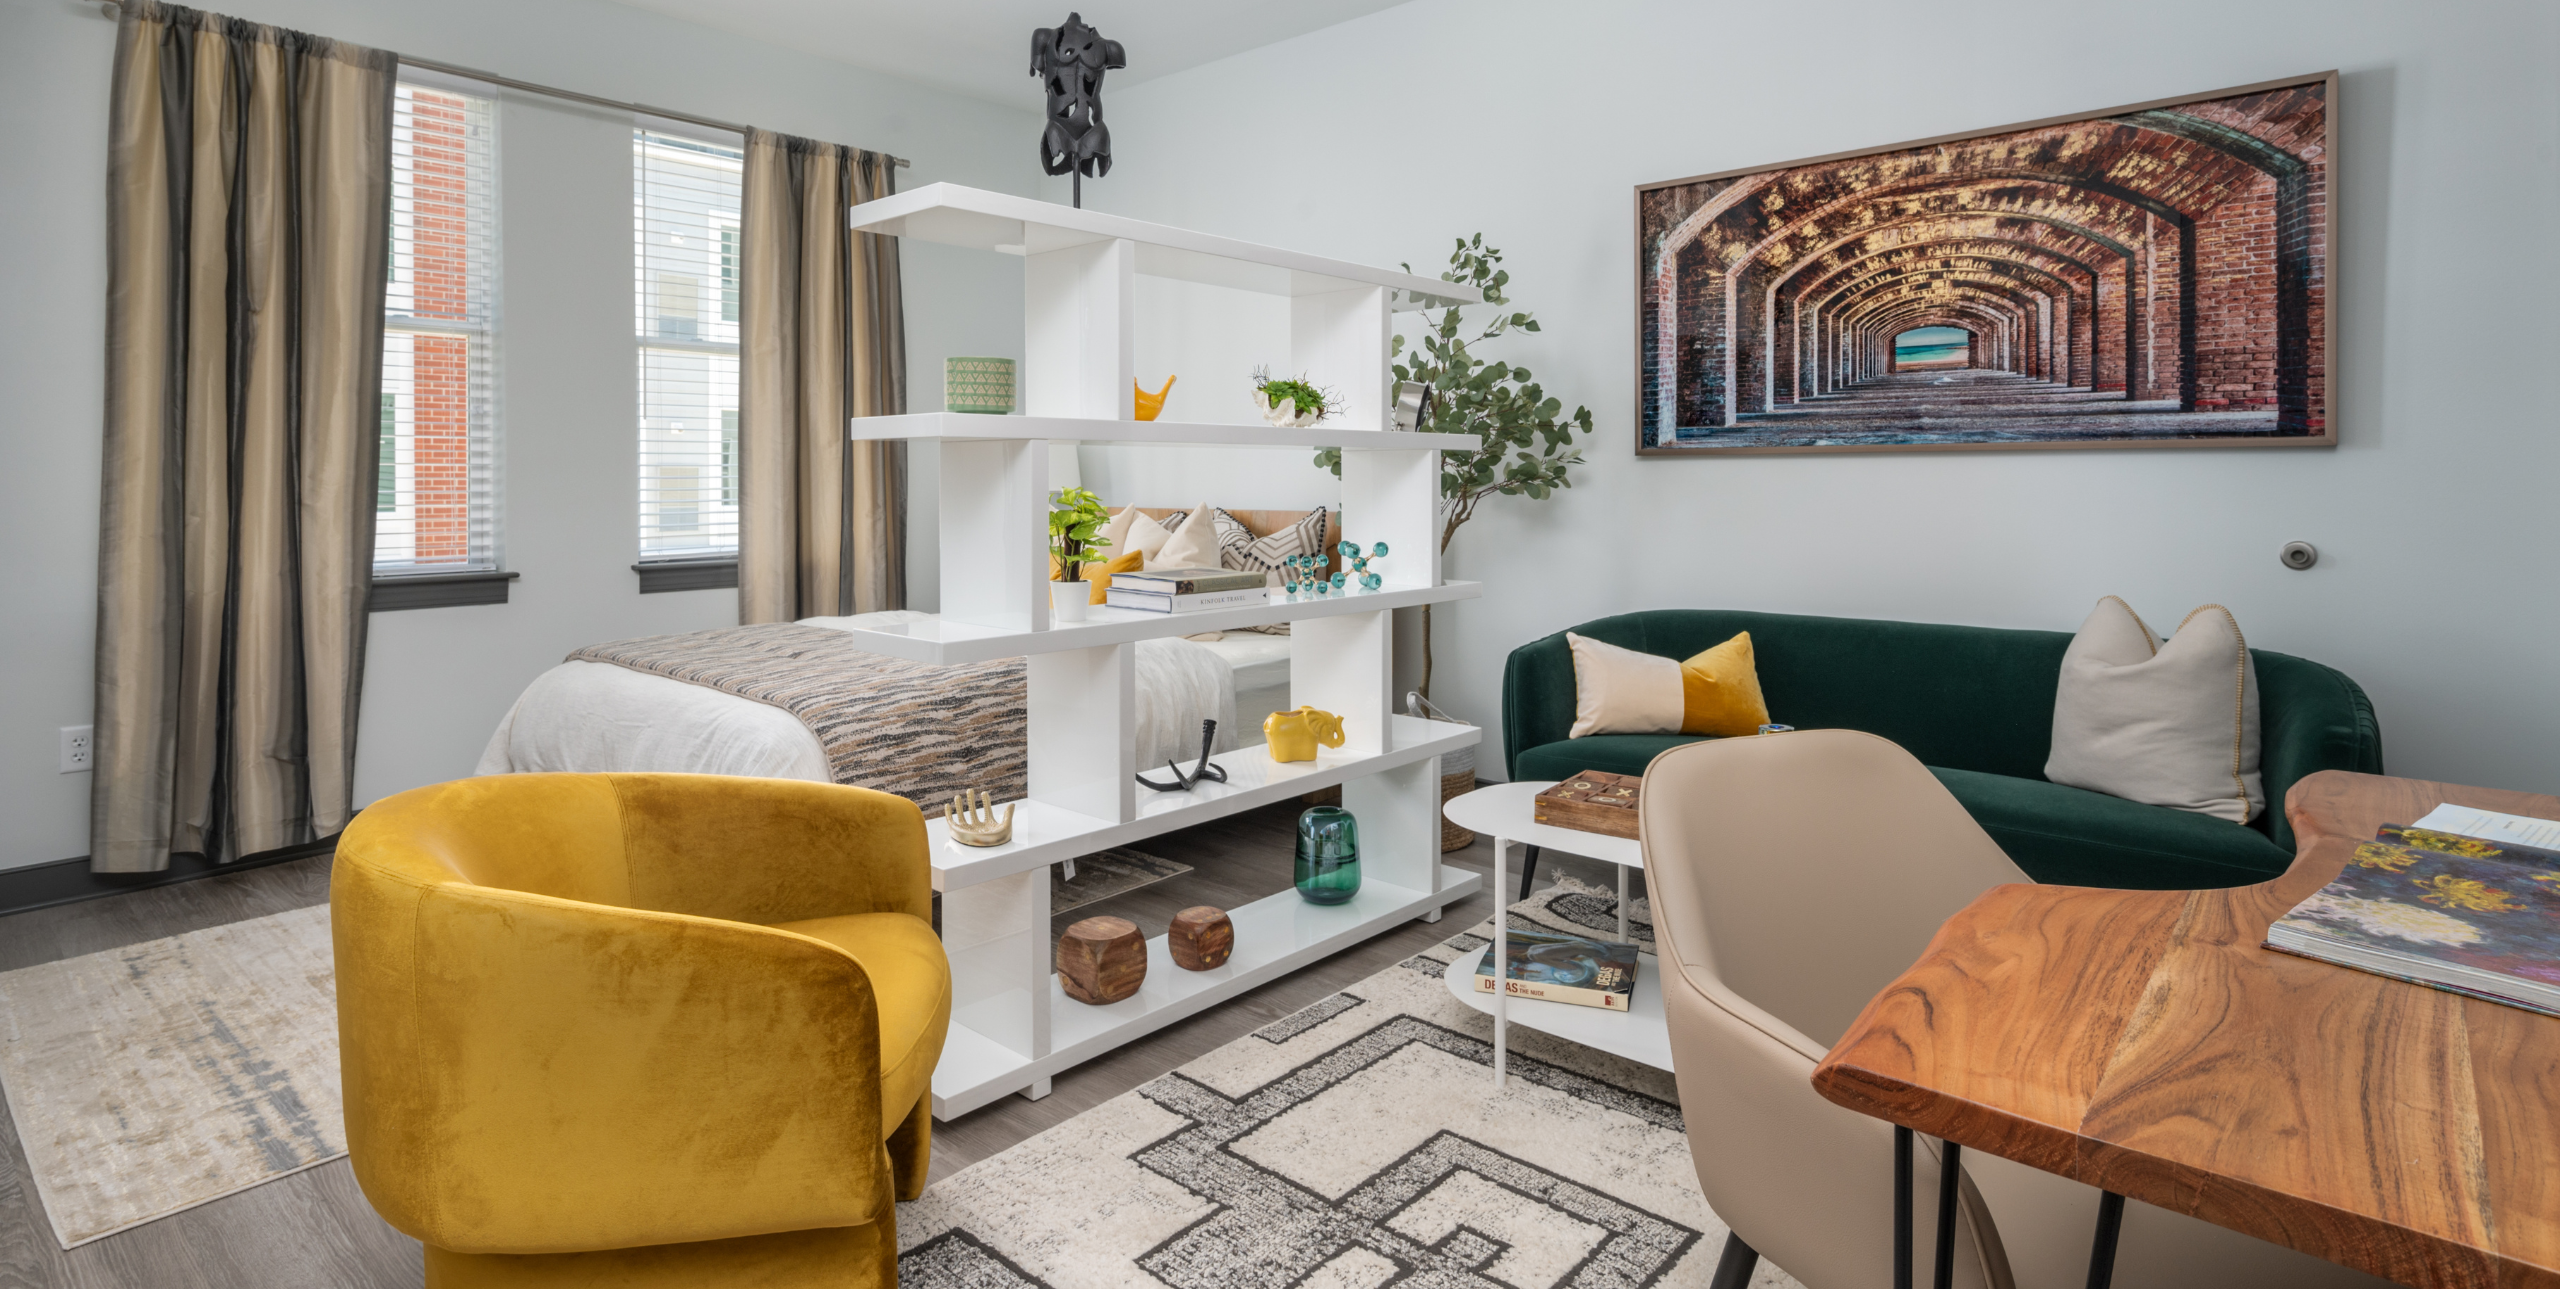 A staged studio apartment at The Core in Ronkonkoma